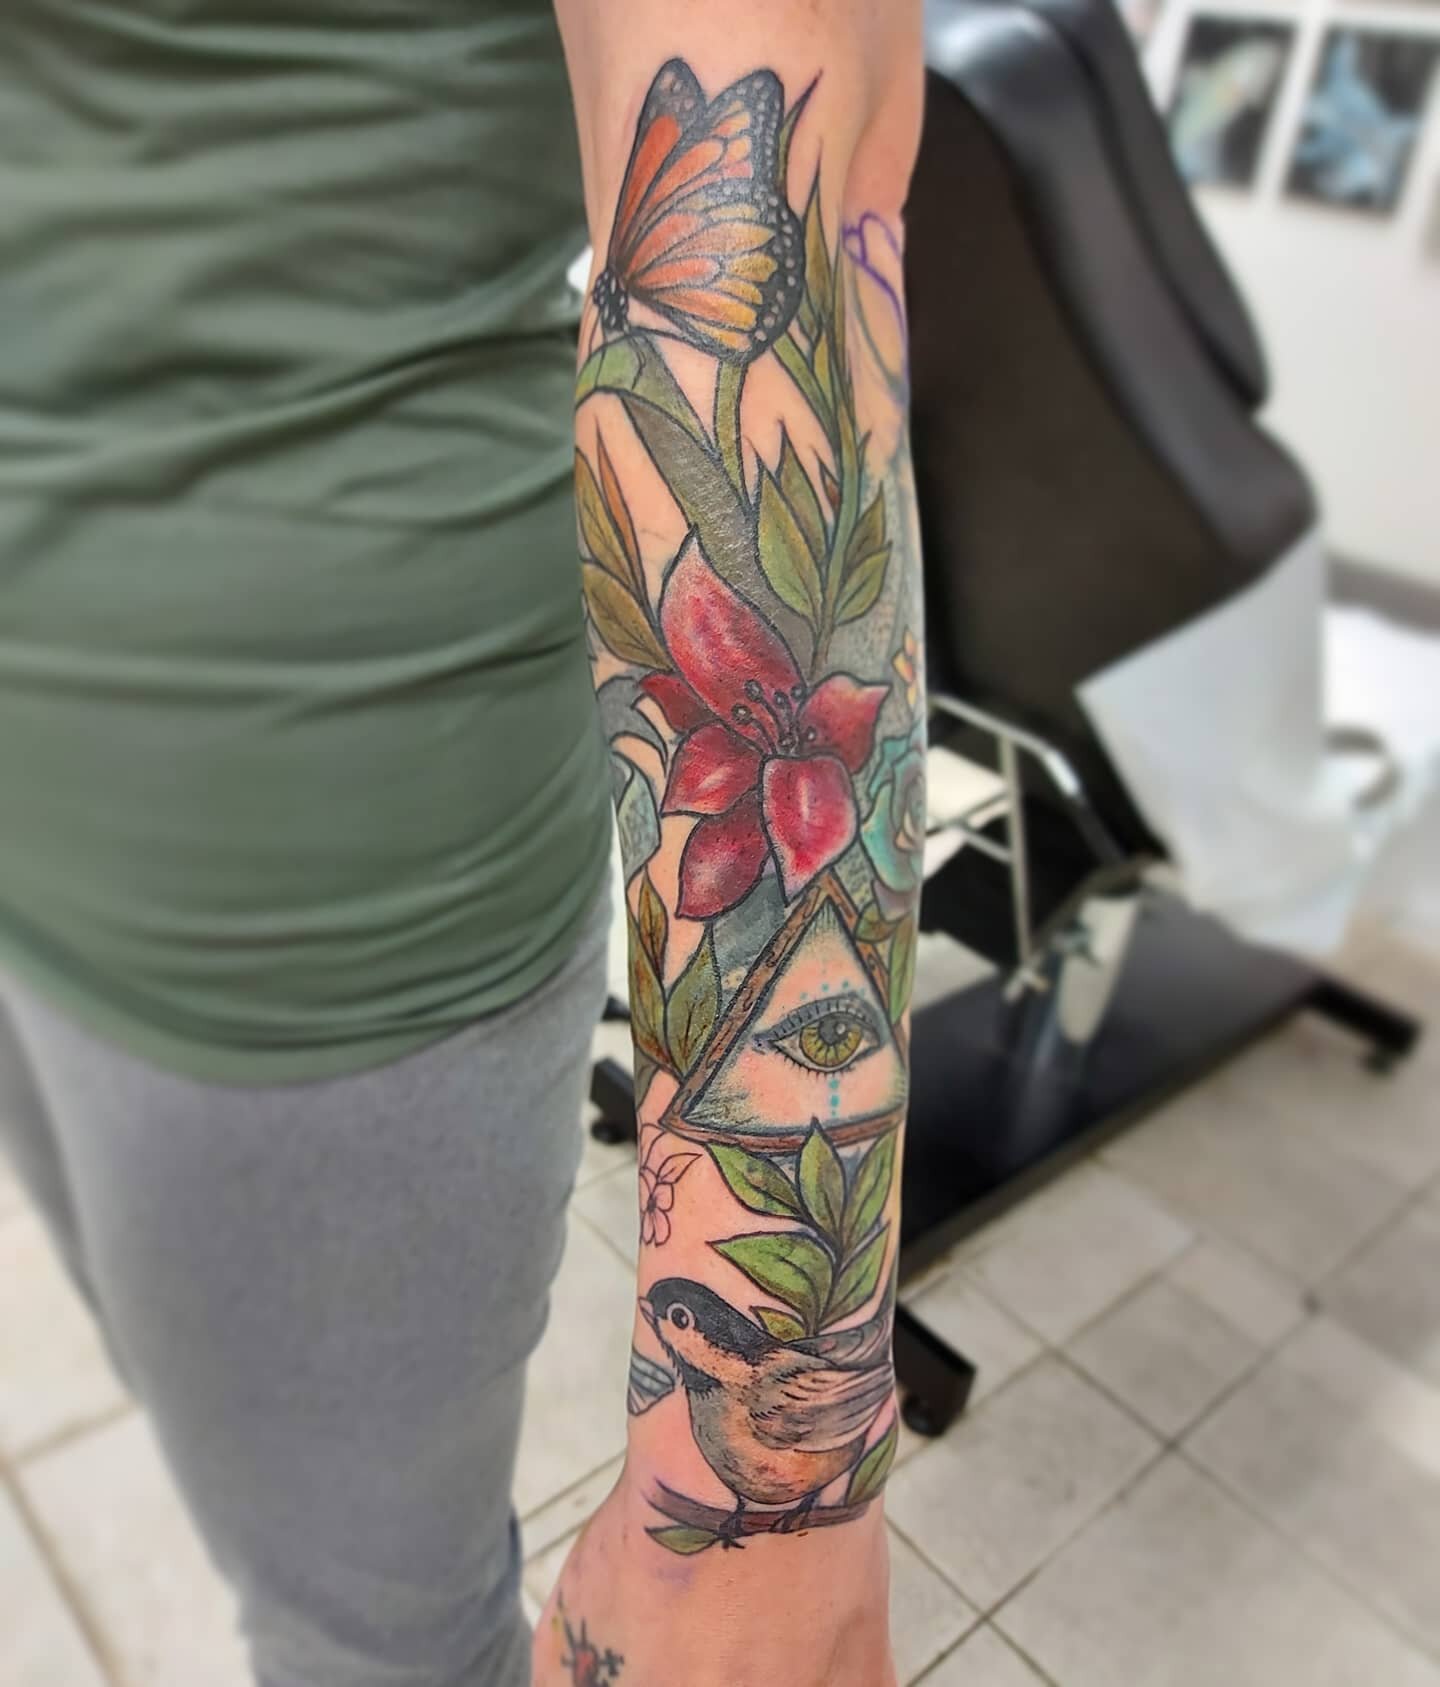 Got a great first session into this rework/cover up sleeve. I love a challenge like this. Last couple pics are what is underneath 
.
.
.
.
.

#ladytattooers #tattooartist #torontotattoo #tattootoronto #ink #inked #torontoink #416 #yyz #artist #toront